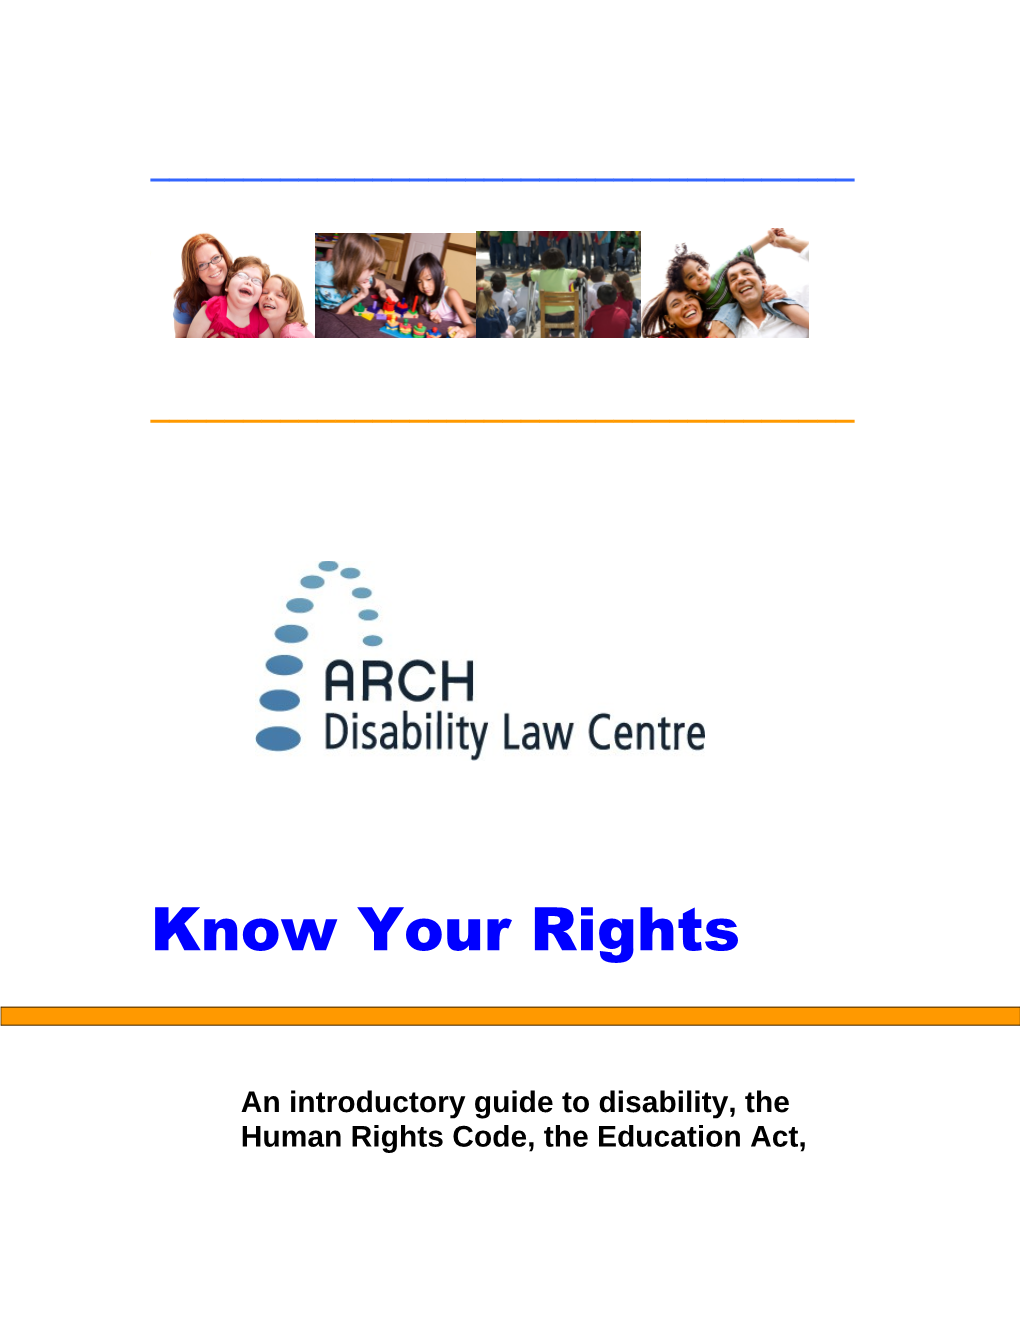 ARCH Disability Law Centre Is a Specialty Legal Clinic Funded by Legal Aid Ontario That